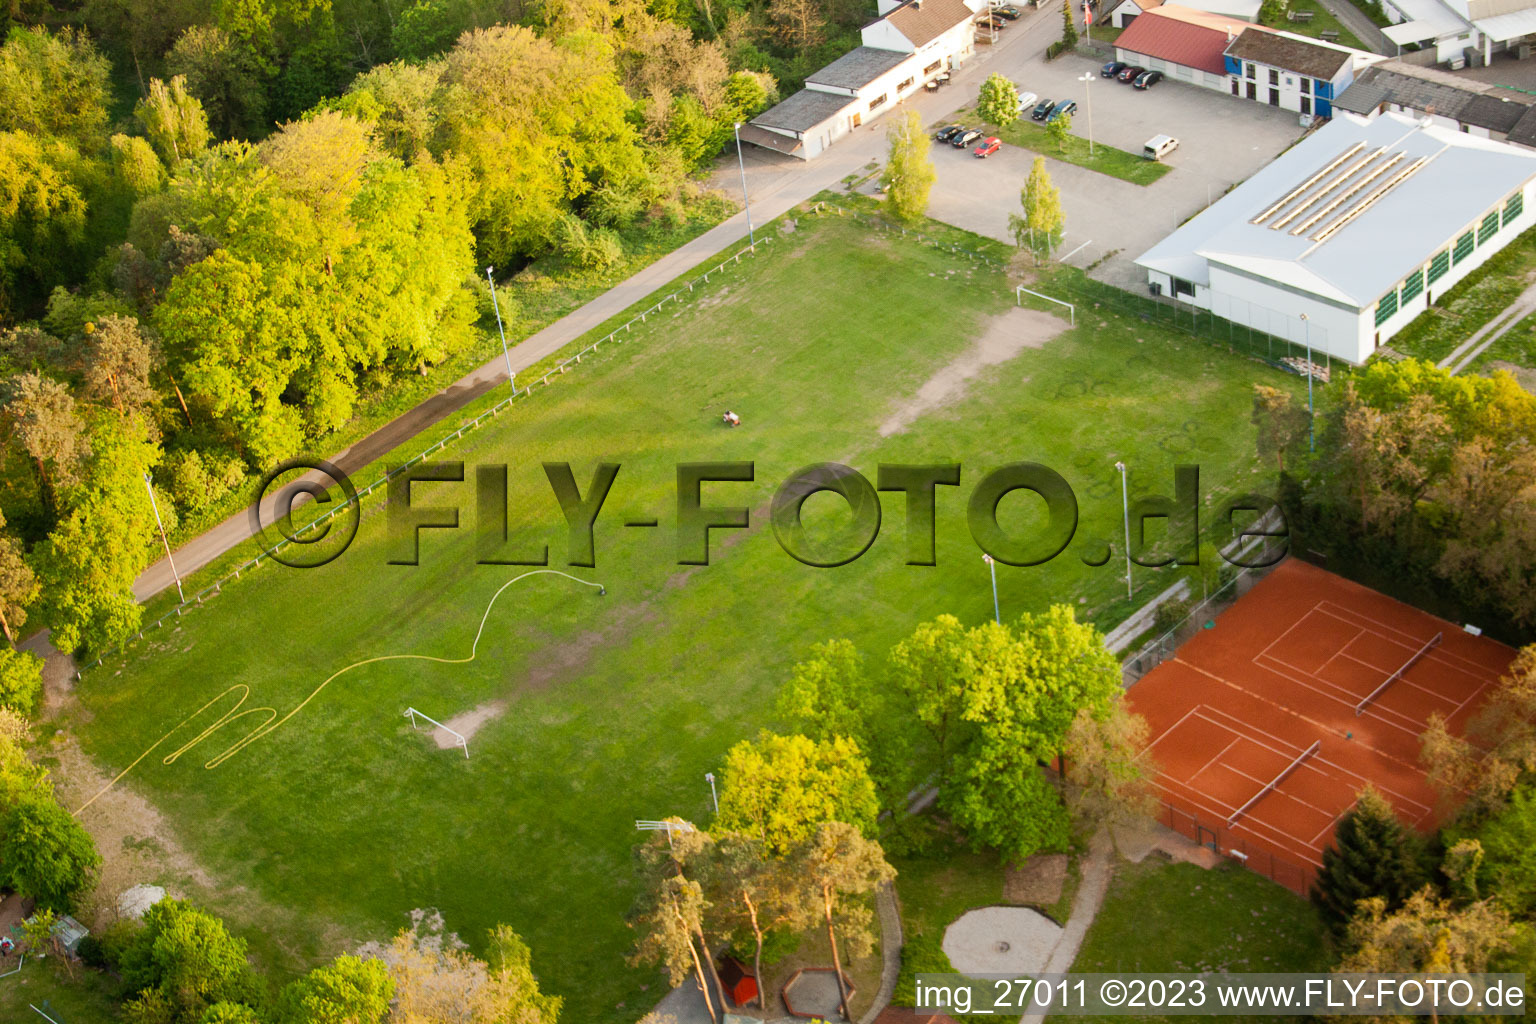 Aerial photograpy of Sports facilities in Berg in the state Rhineland-Palatinate, Germany